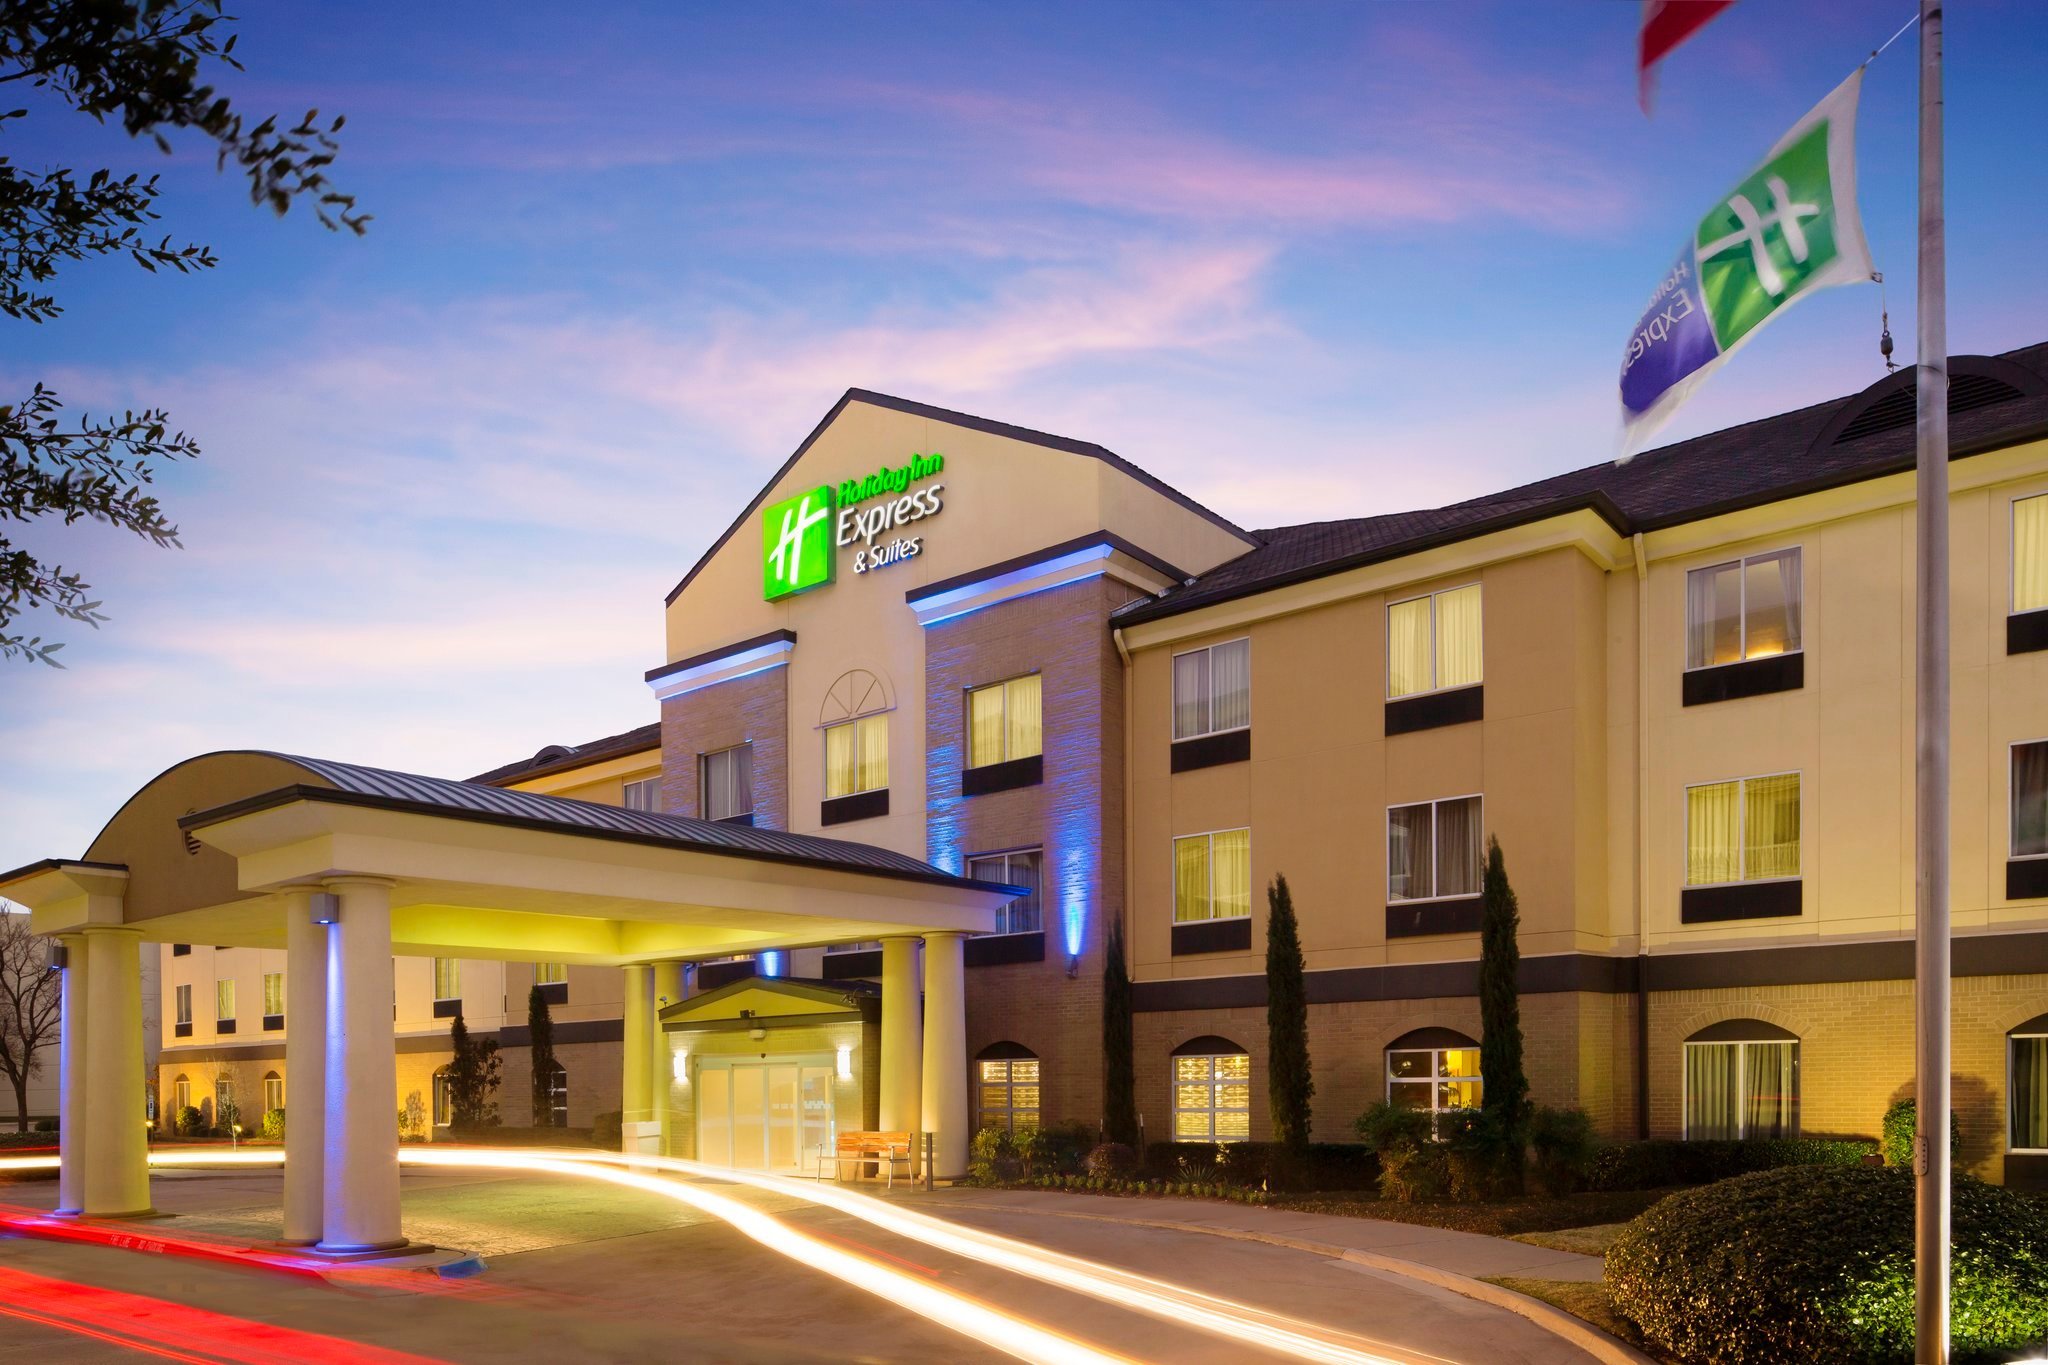 Photo of Holiday Inn Express & Suites DFW-Grapevine, Grapevine, TX